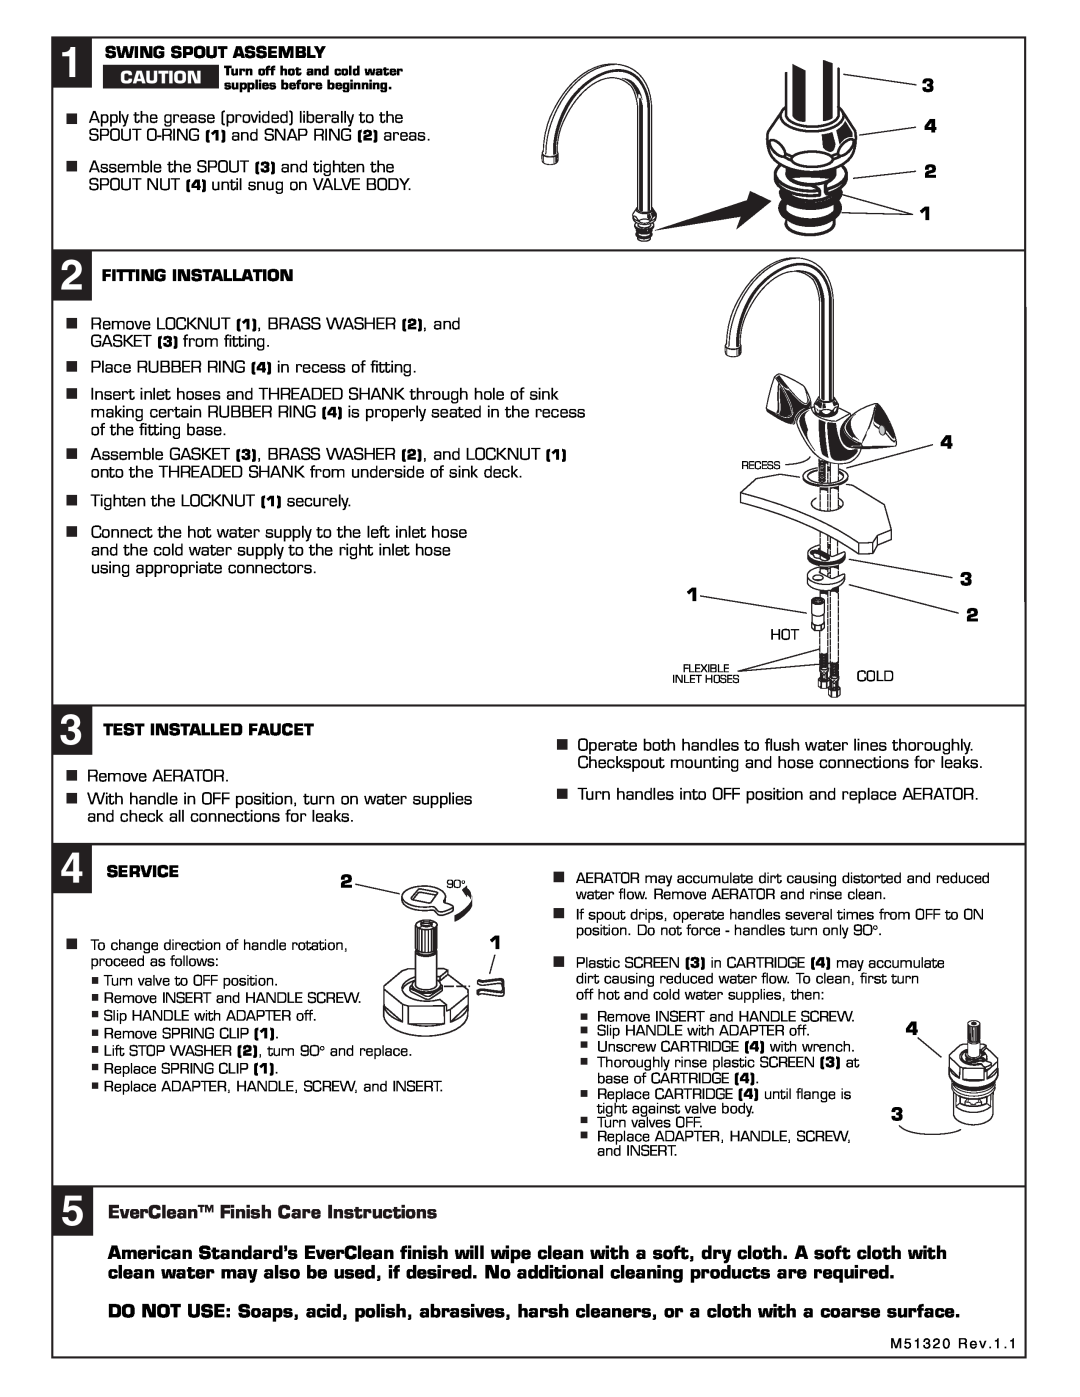 American Standard 7190.132 3 4 2 1 4, EverClean Finish Care Instructions, Swing Spout Assembly, Fitting Installation 